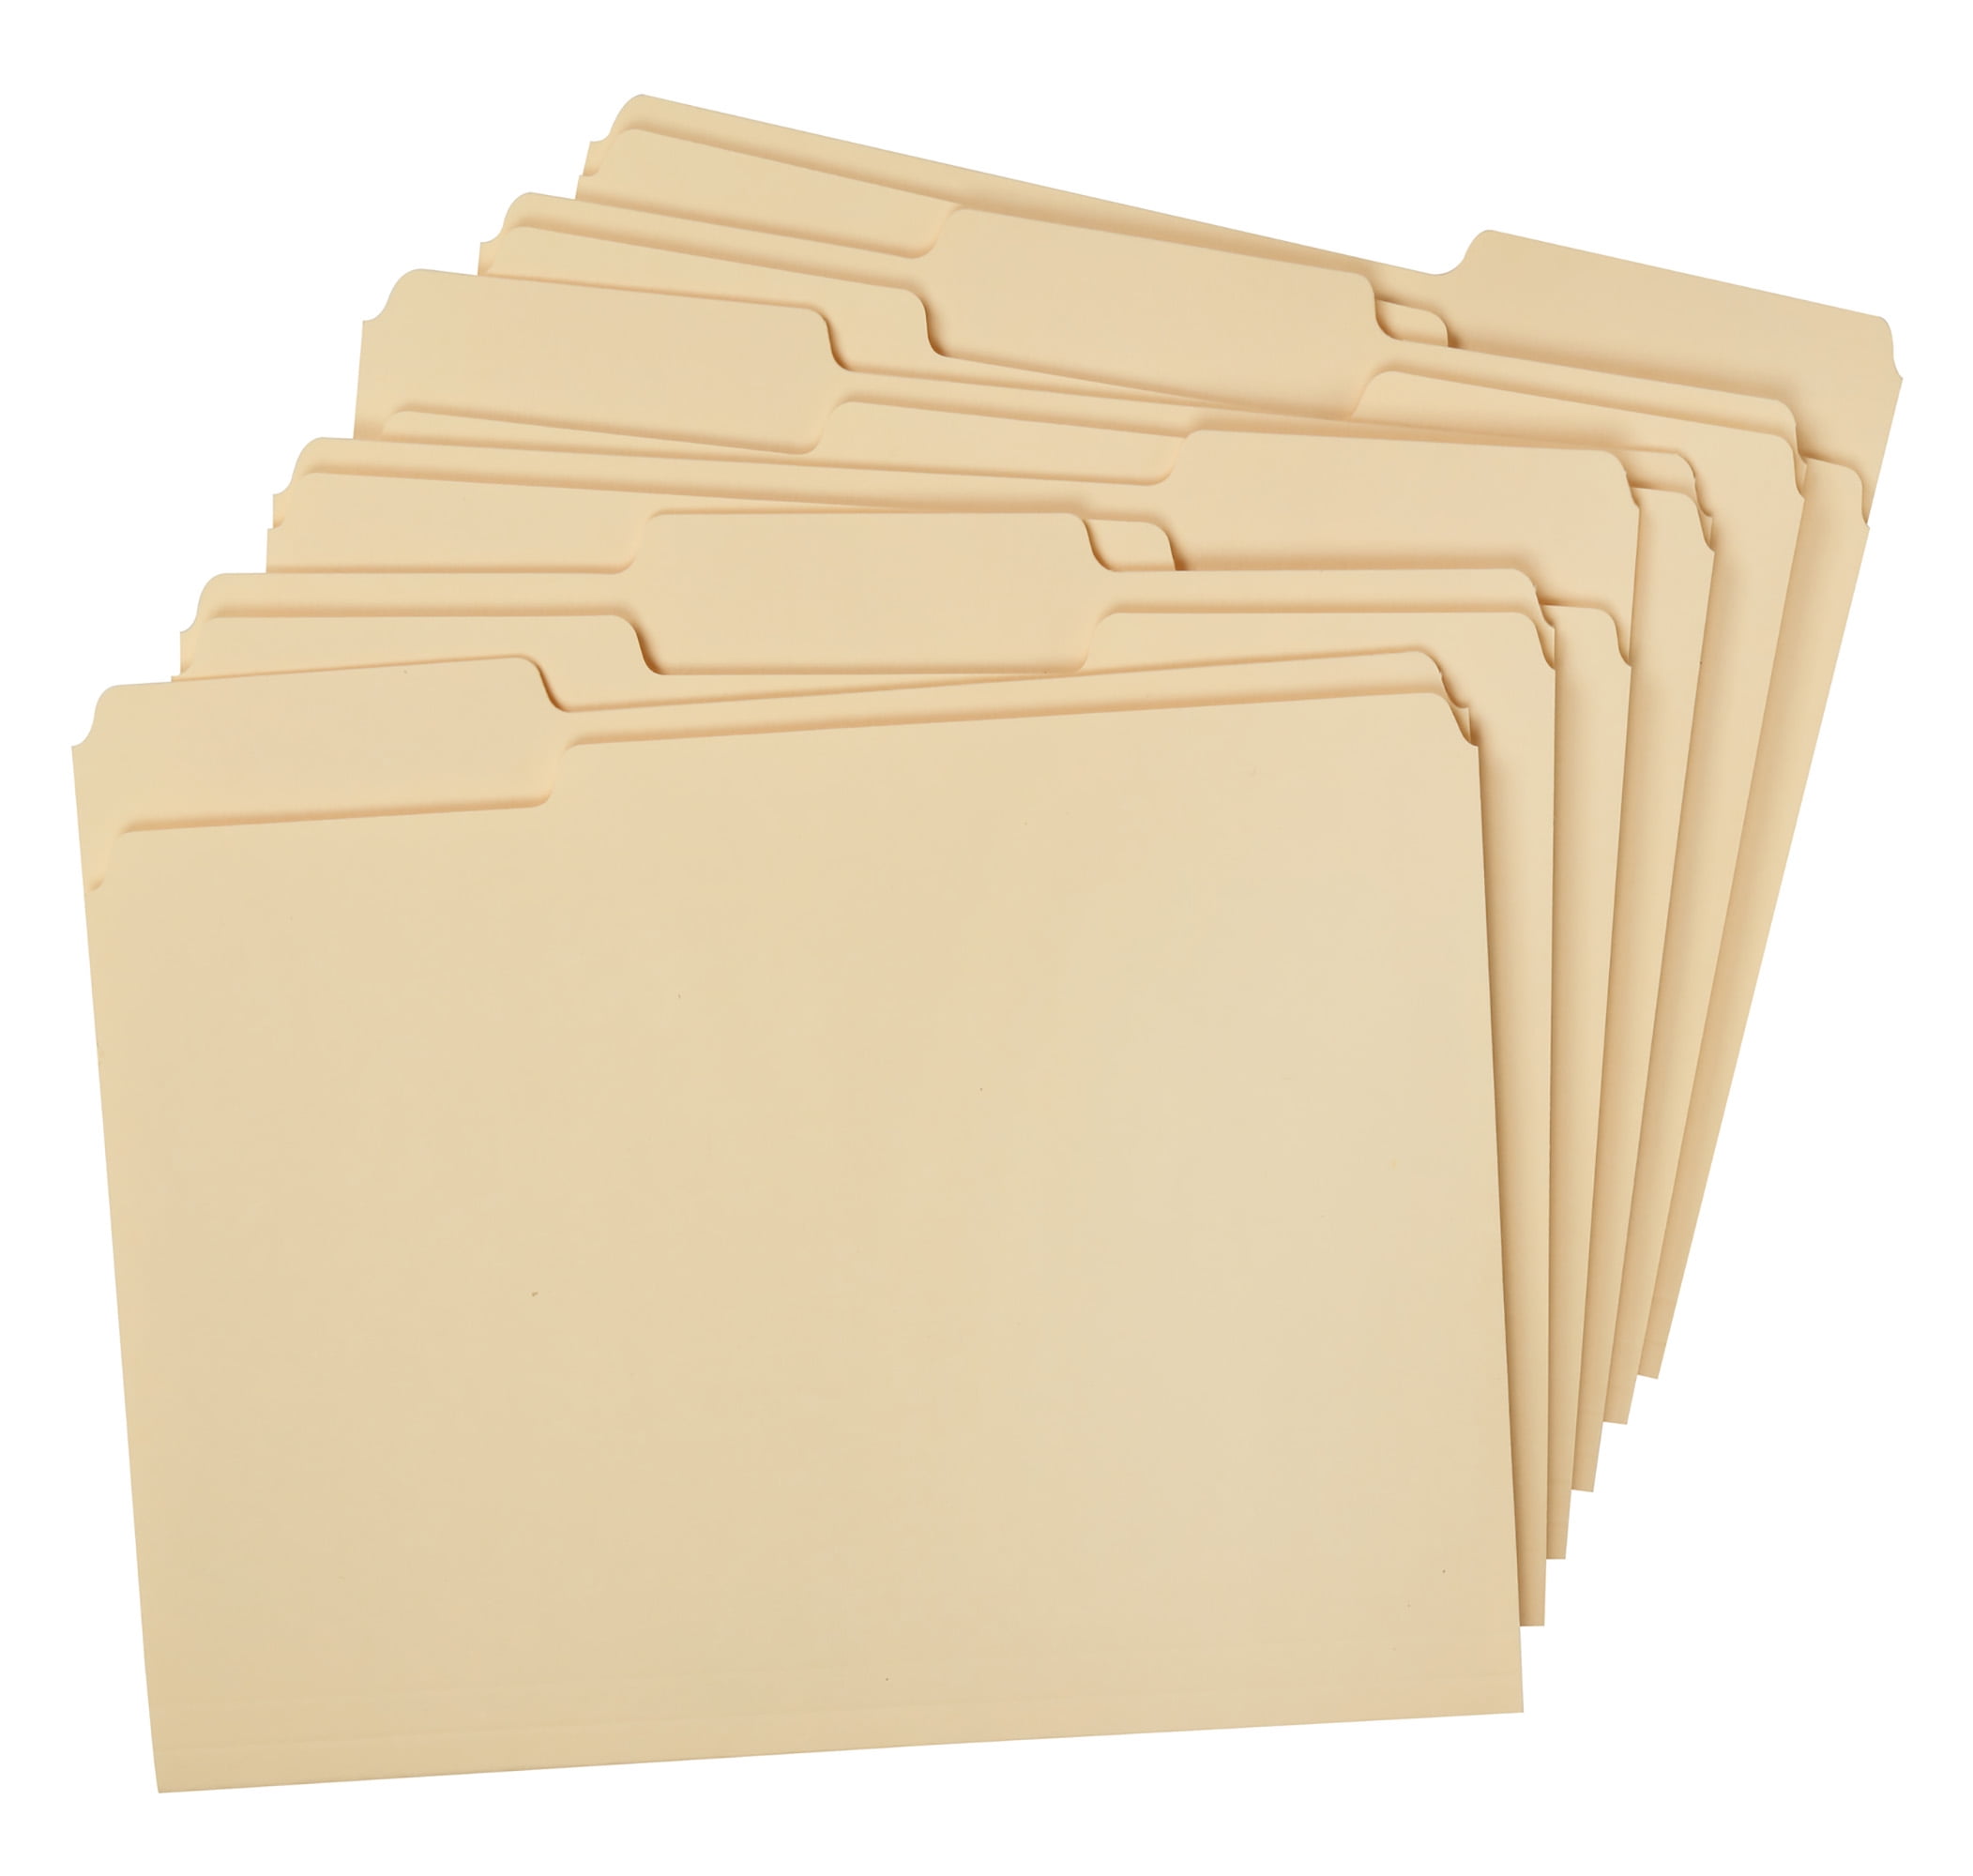  JPD2226316988G  JAM Paper Plastic Sleeves, 9 x 11.5, Clear, 12  Pack (2226316988g)